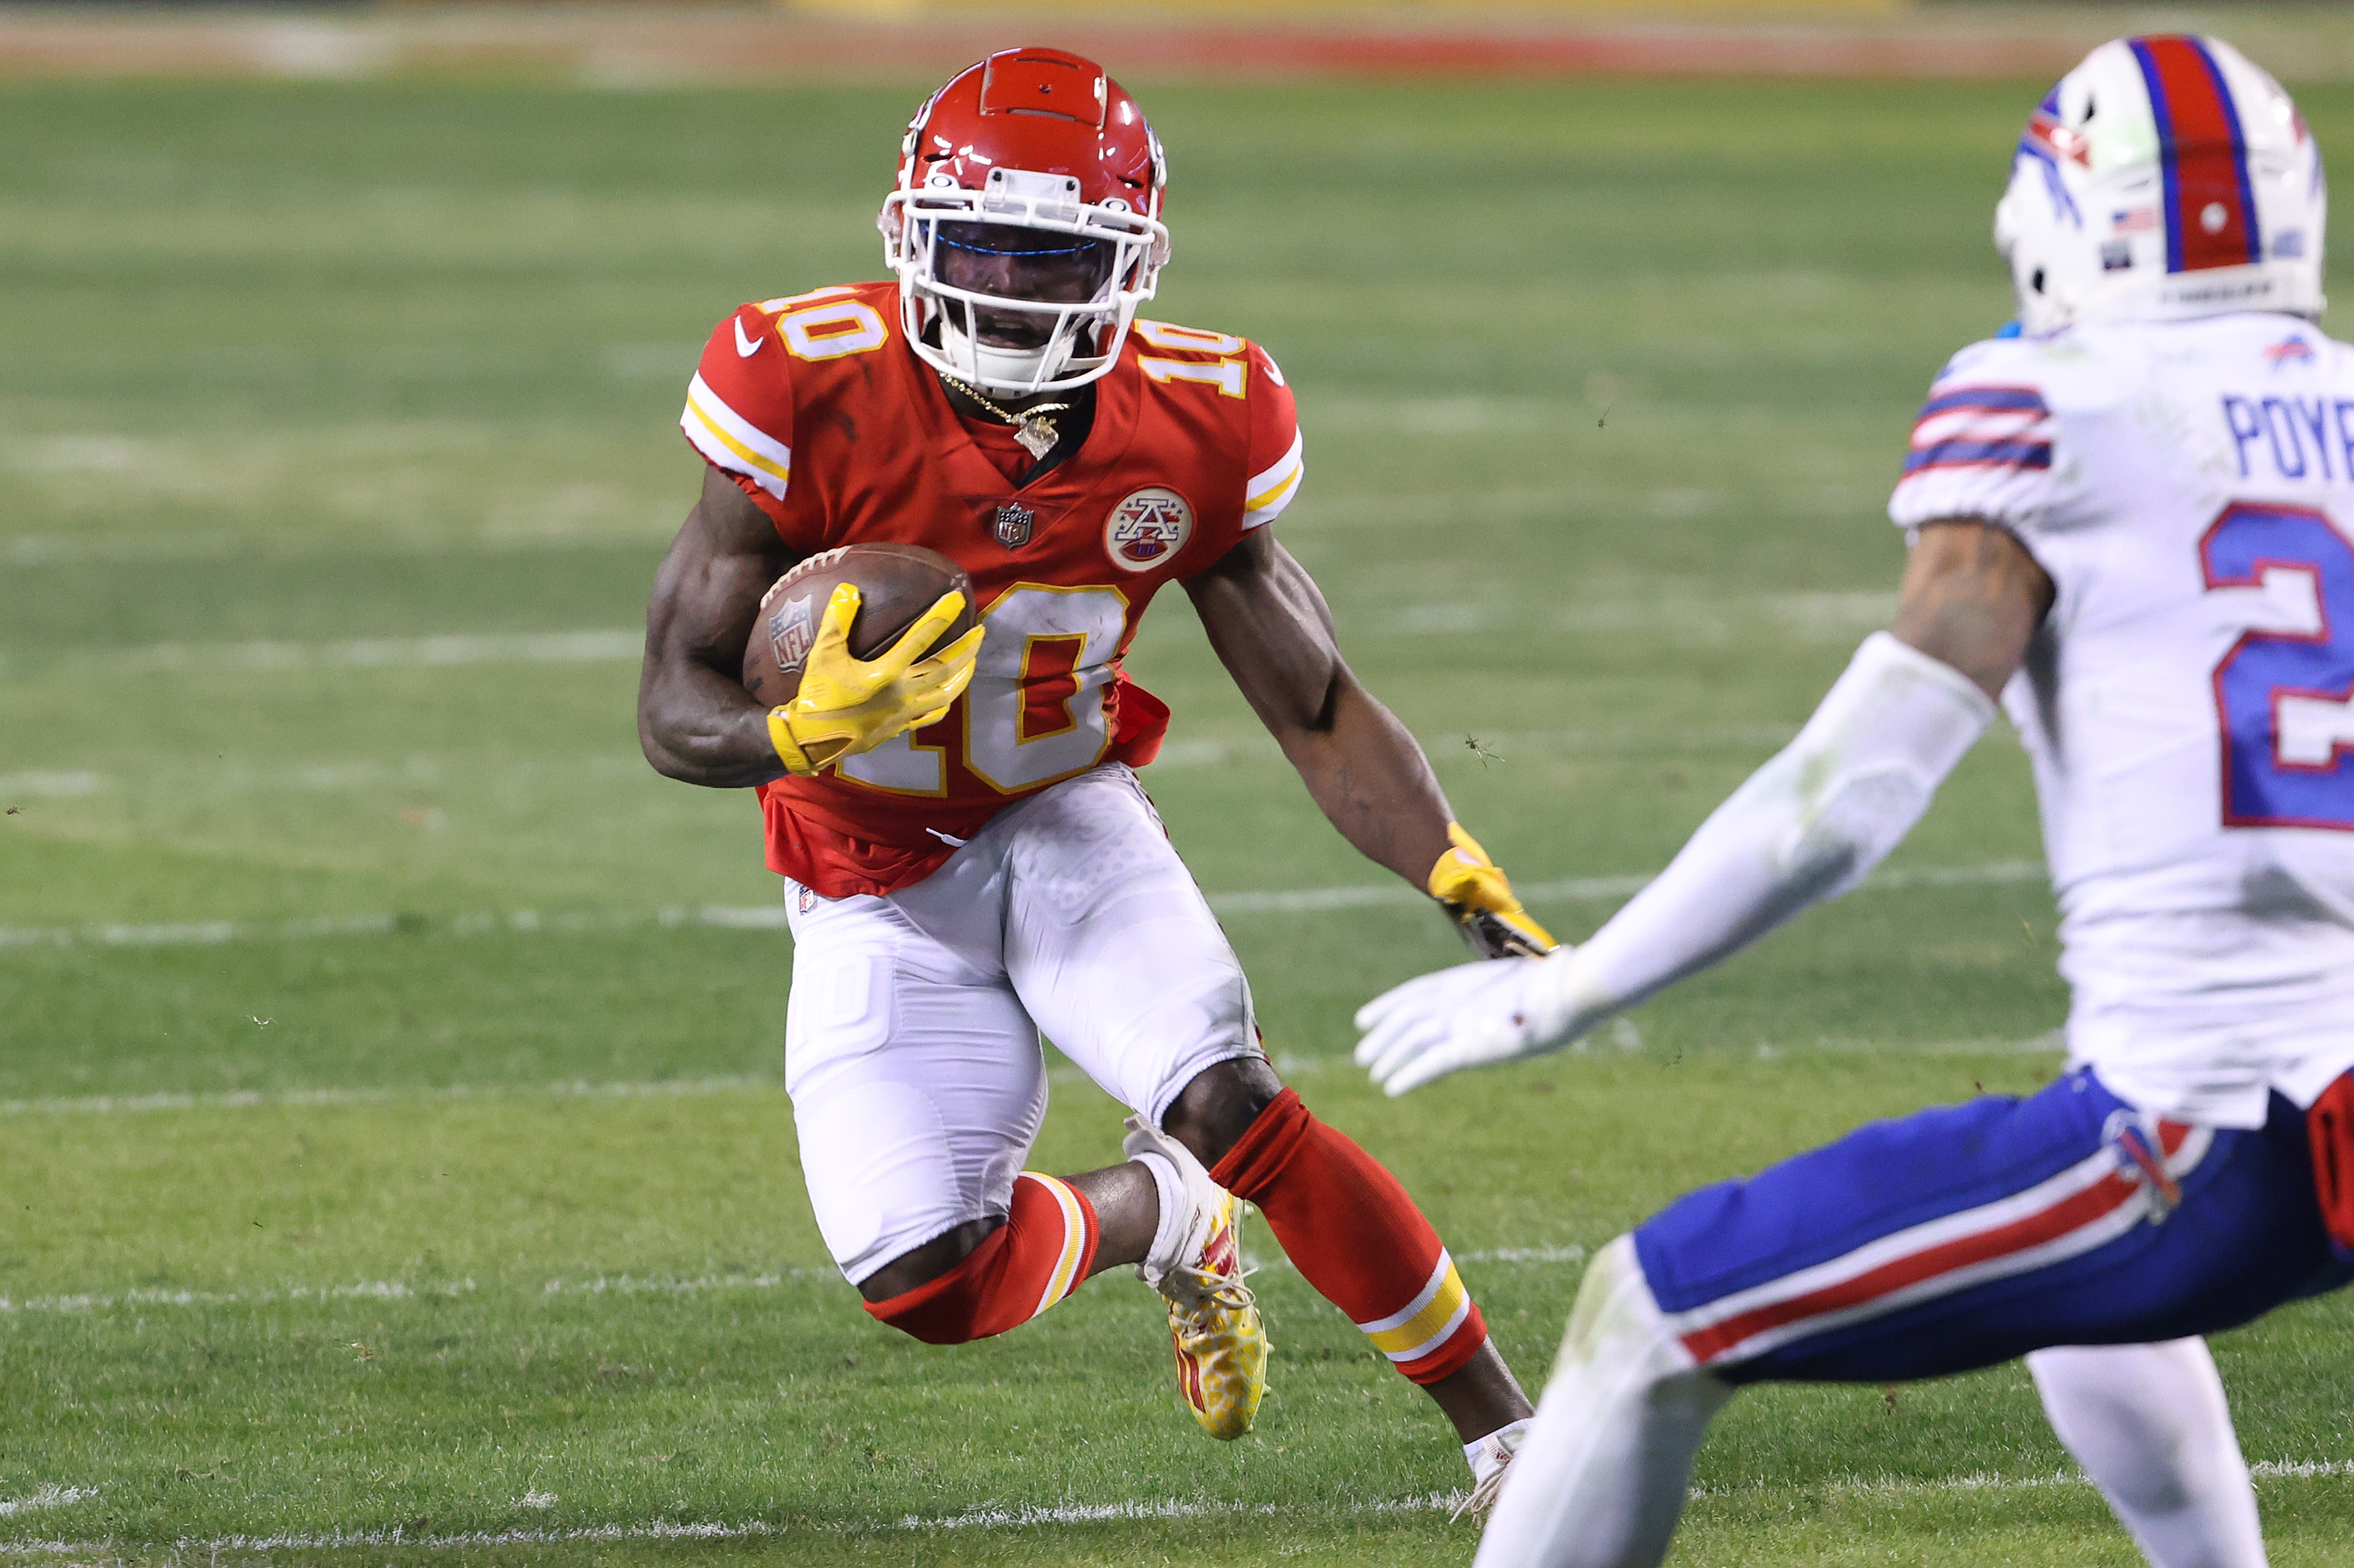 CBS4’s Steve Goldstein’s Hot Take On Dolphins Getting Pro Bowl WR Tyreek Hill